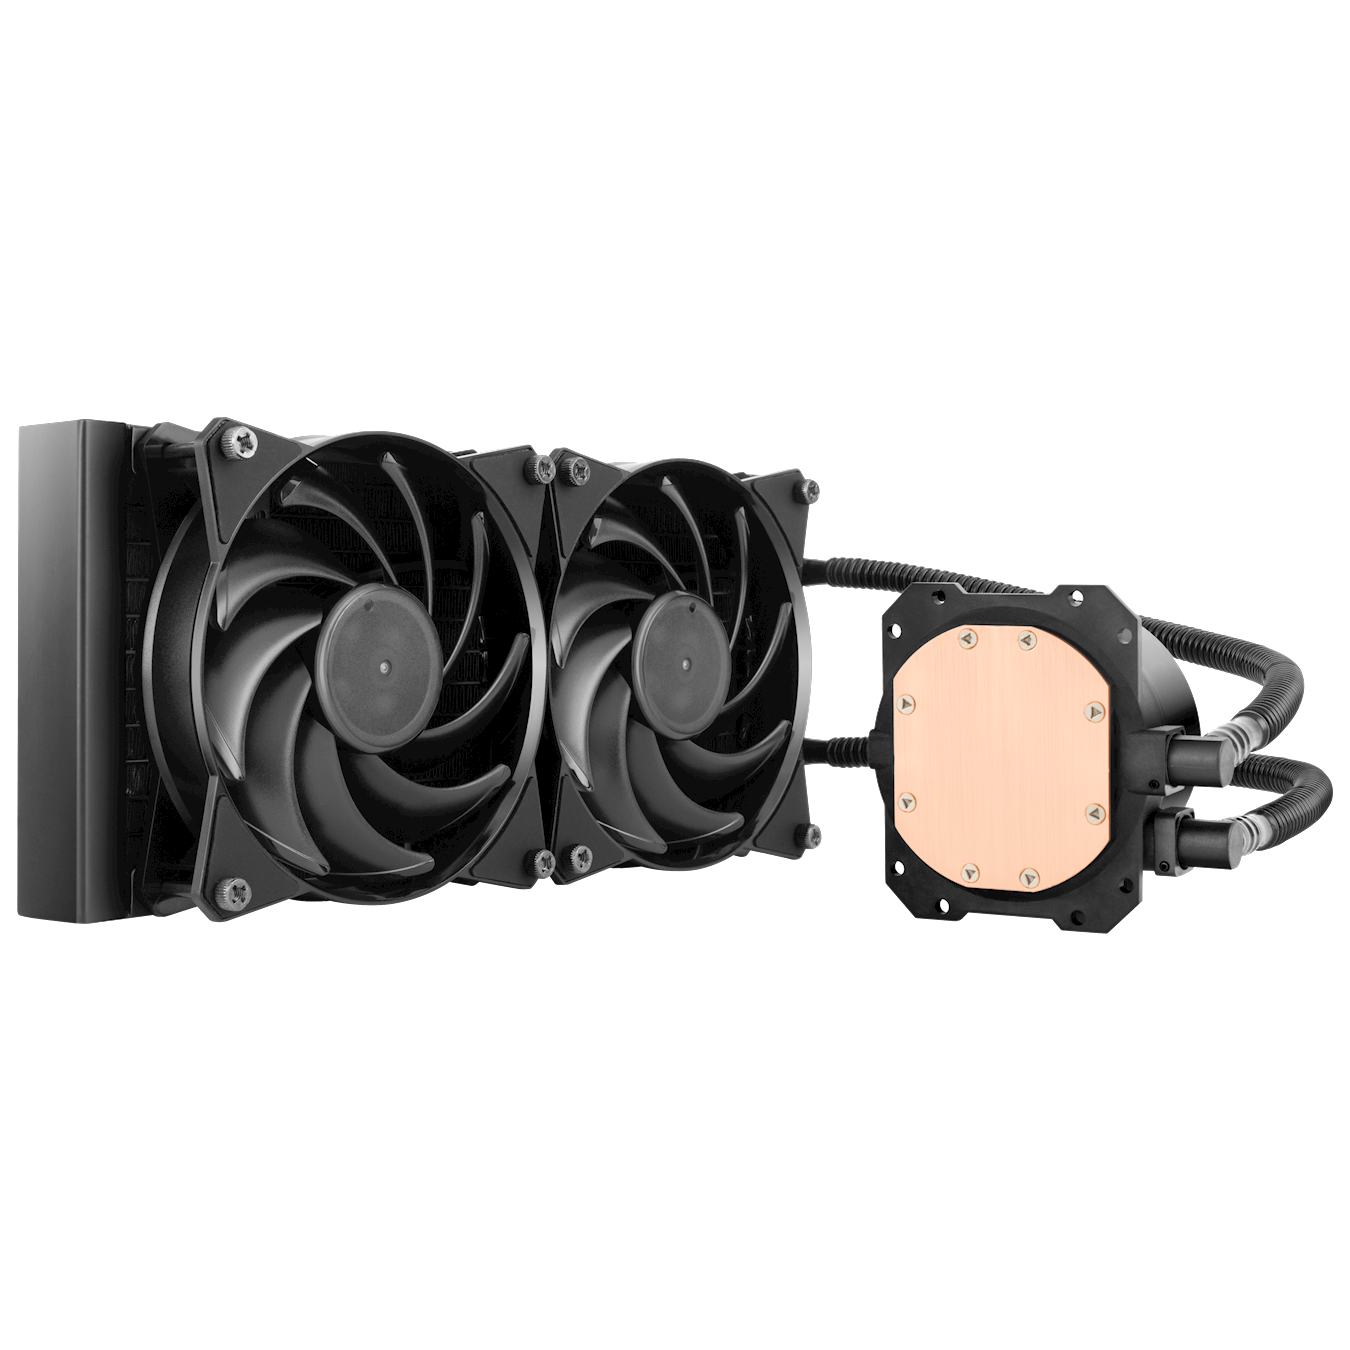 Cooler Master controls quality and builds ondecades of innovation with 100% in-house design and manufacturing